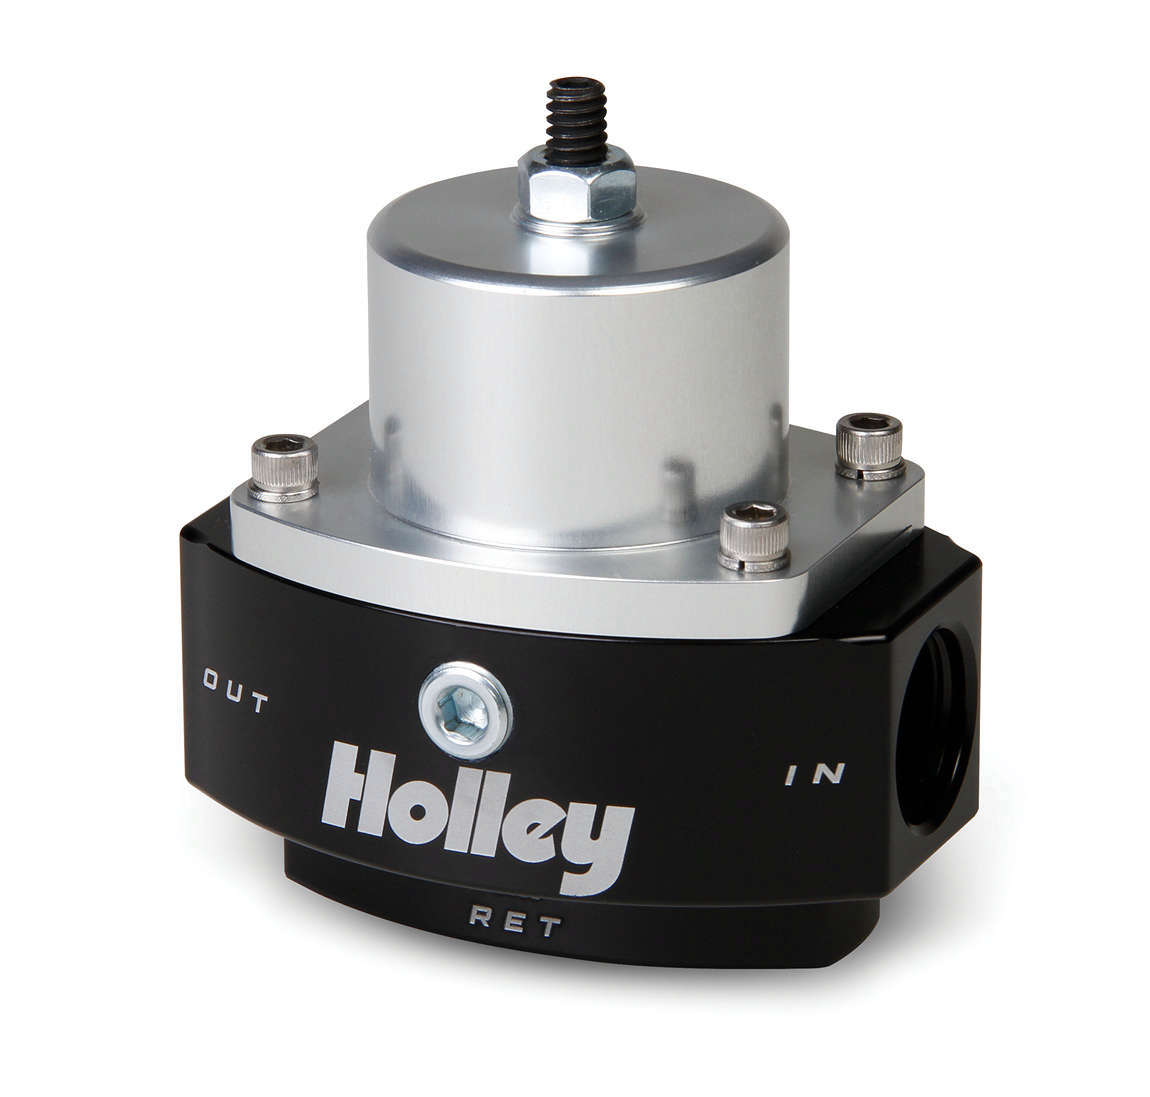 Holley 12-845 Fuel Pressure Regulator, HP Billet, 4.5 to 9 psi, In-Line, 8 AN Female O-Ring Inlet, 8 AN Female O-Ring Outlet, 6 AN Female O-Ring Return, 1/8 in NPT Port, Bypass, Aluminum, Black / Clear Anodized, Diesel / E85 / Gas, Each